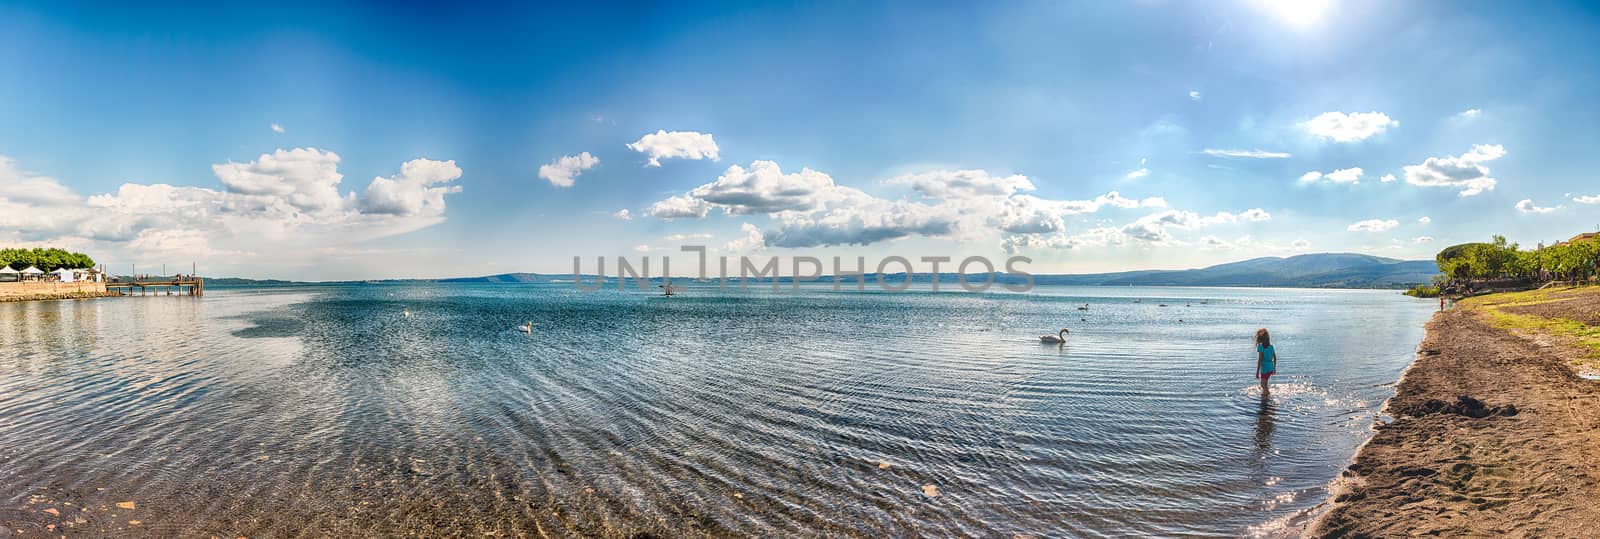 Panoramic view over lake Bracciano from the Trevignano side, with swans and a beautiful afternoon golden light